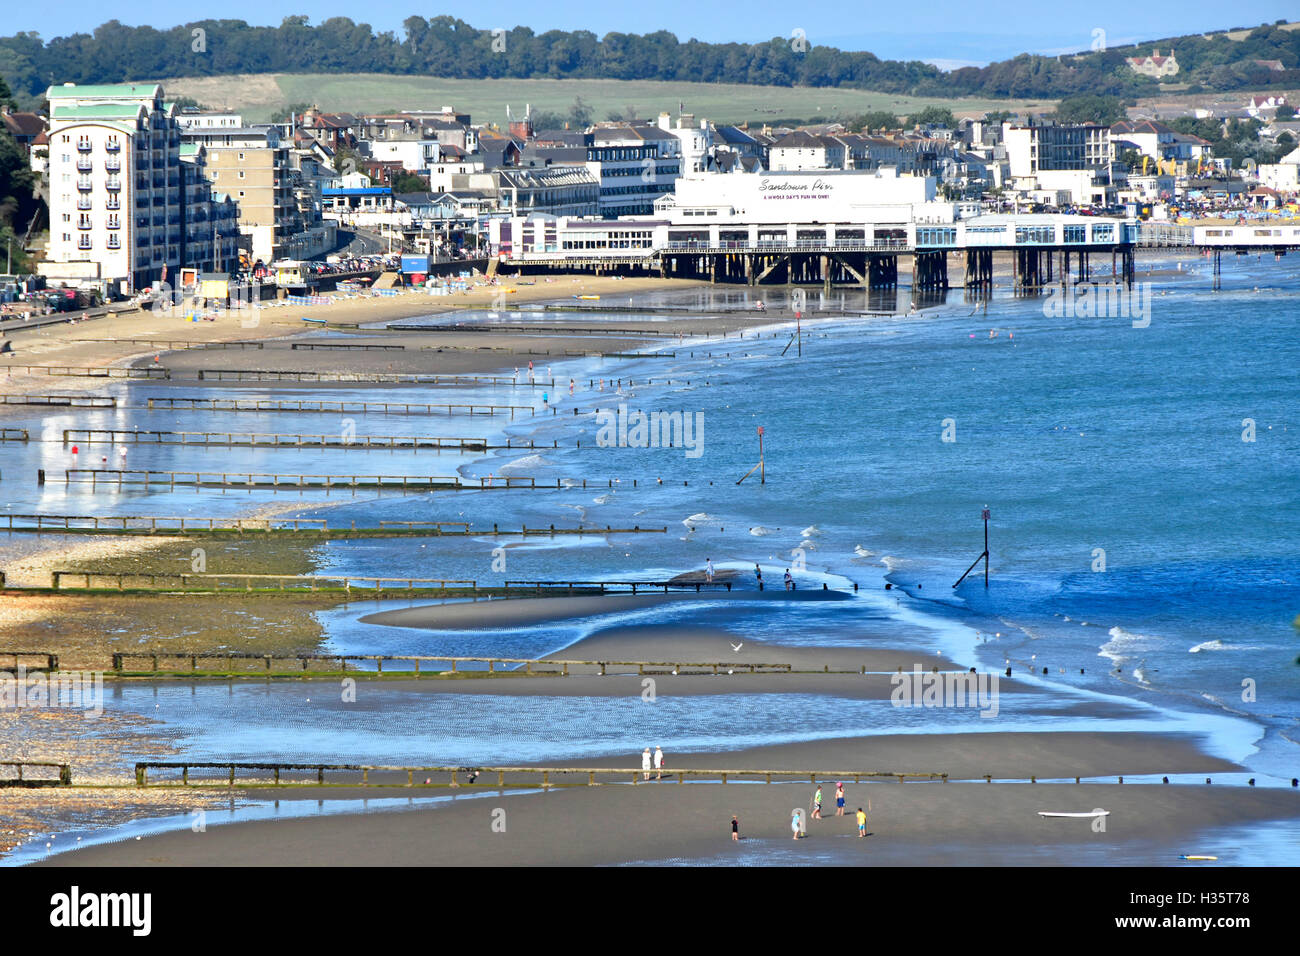 View from above British seaside beach holiday resort Sandown Pier Isle of Wight low tide sea breakwaters & groins England uk on blue sky day summer Stock Photo